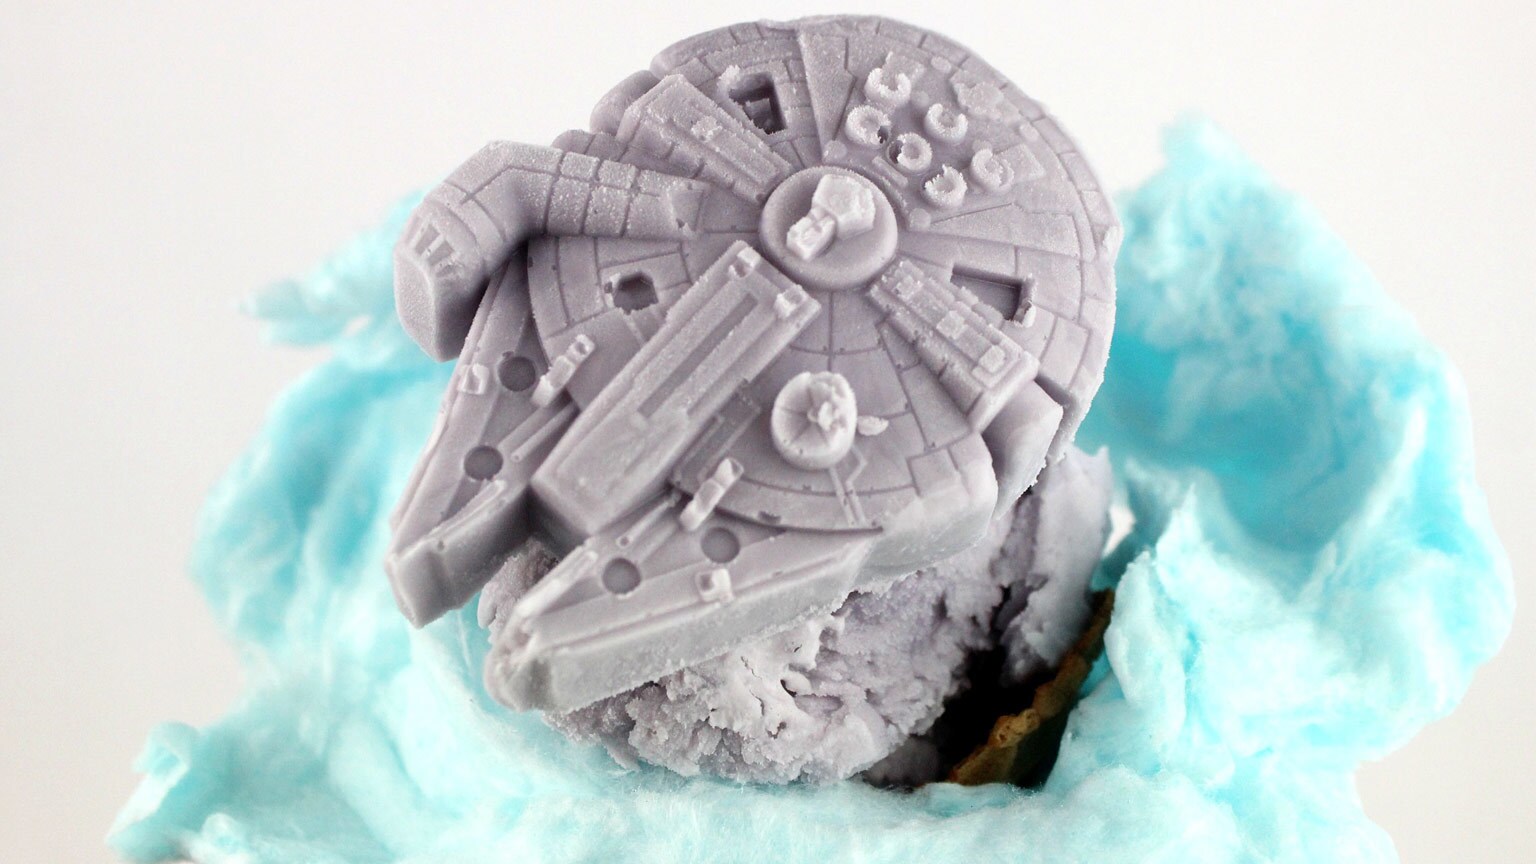 This Millennium Falcon Ice Cream Treat Truly Belongs Among the Clouds